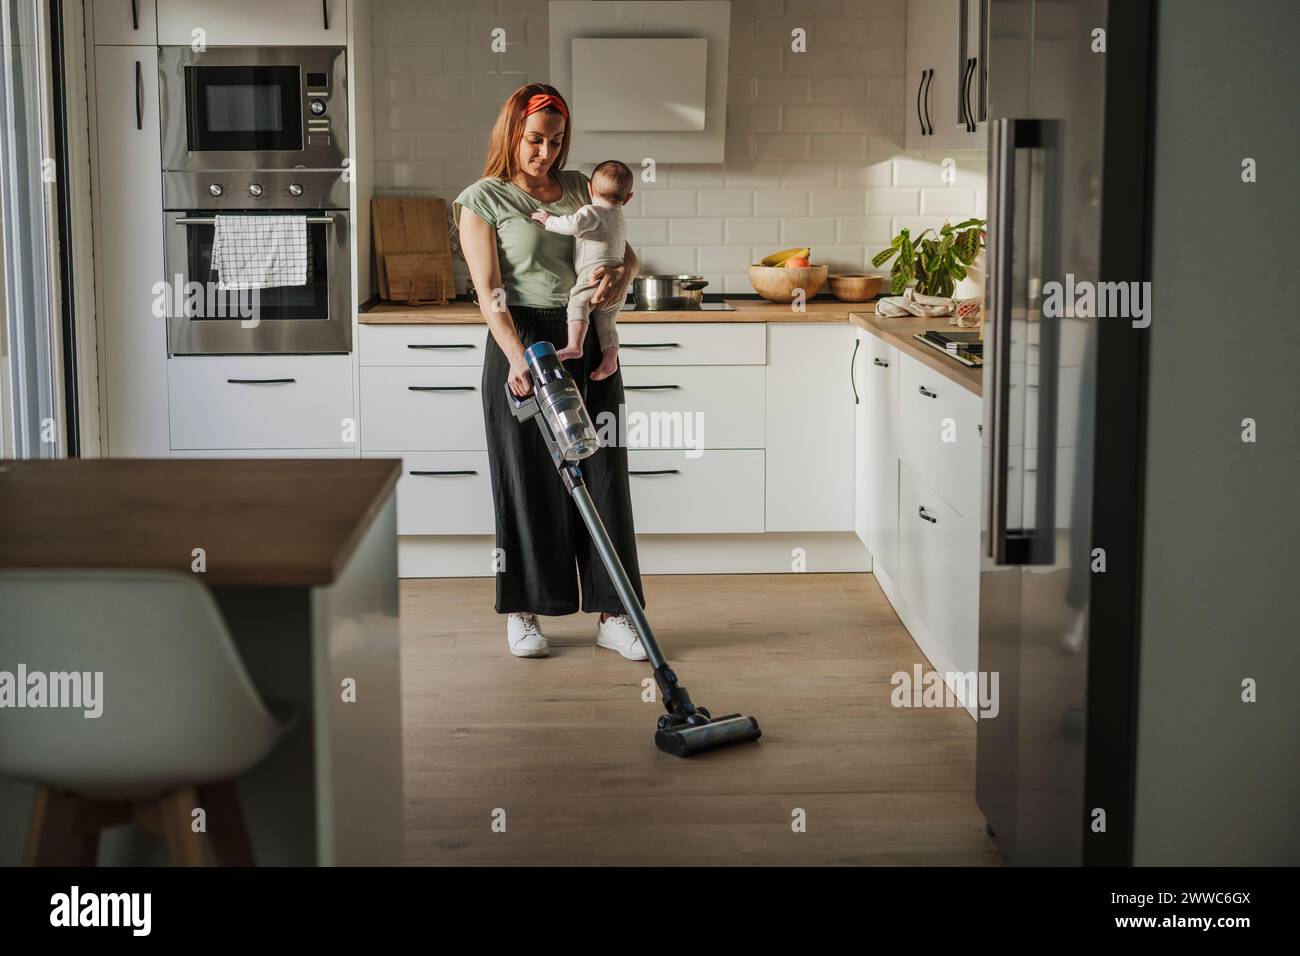 Woman carrying baby daughter and cleaning kitchen with vacuum cleaner Stock Photo